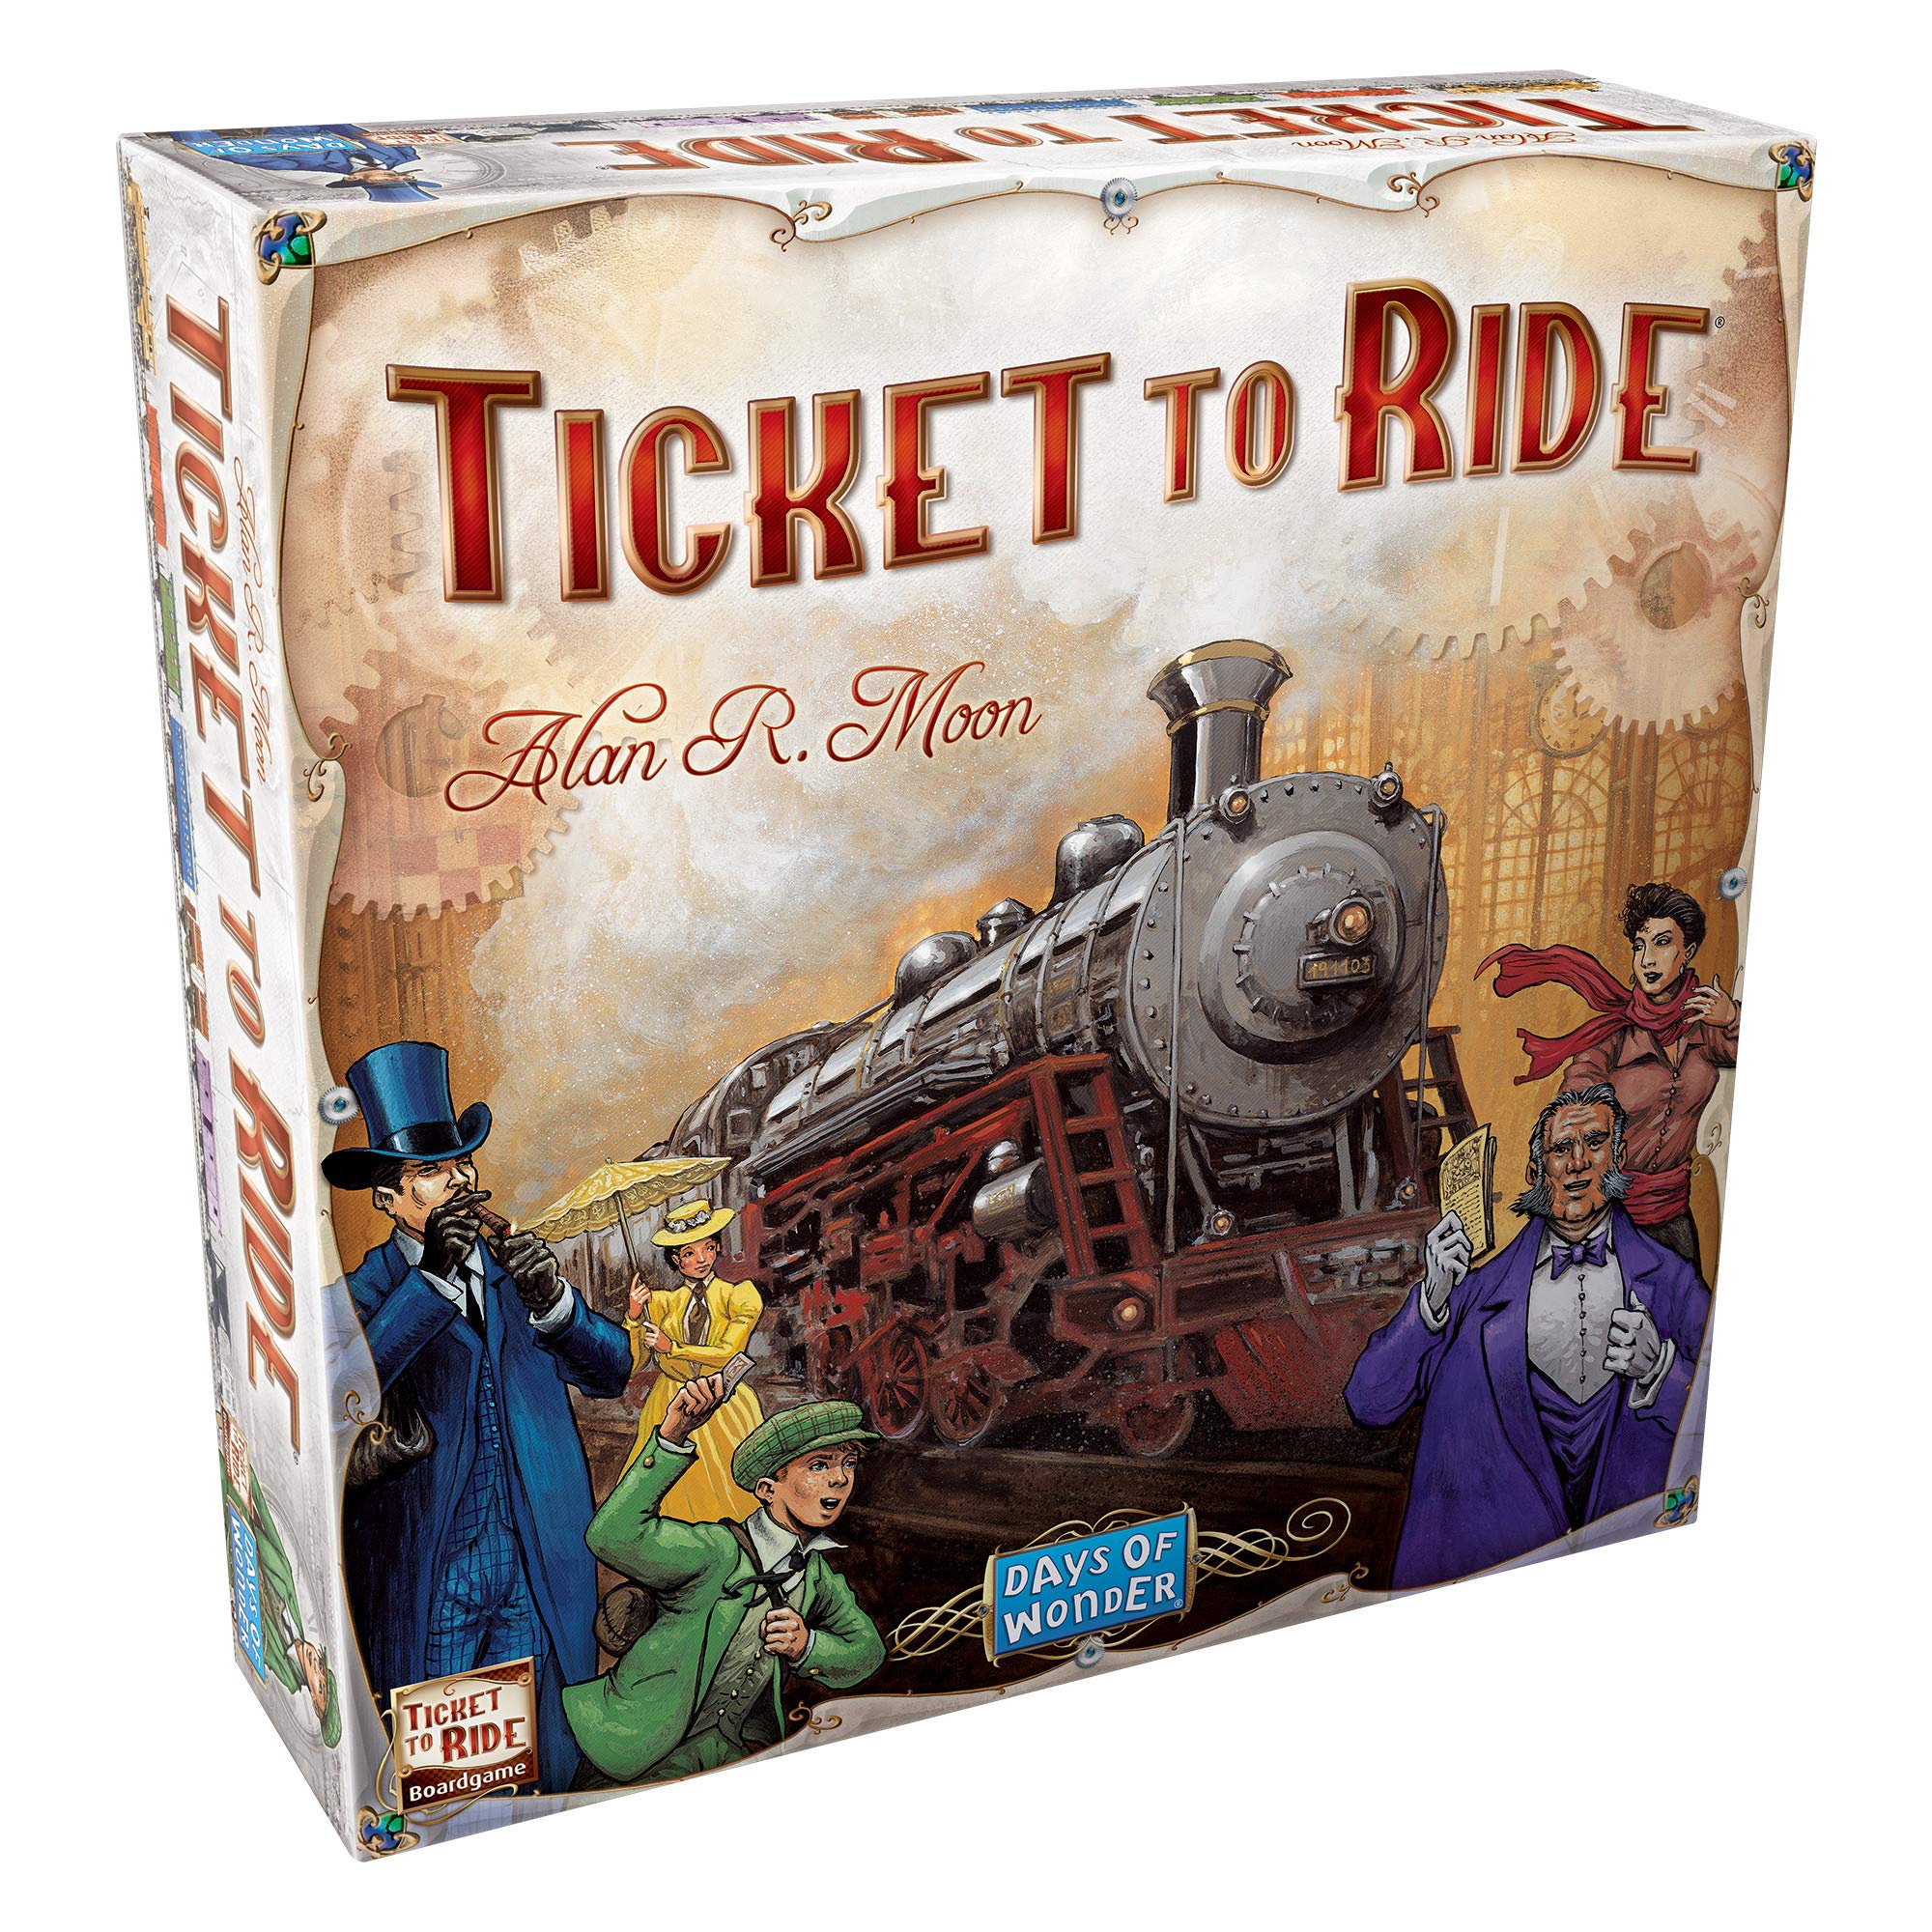 Ticket to Ride Board Game - Target Circle Coupons YMMV $17.62